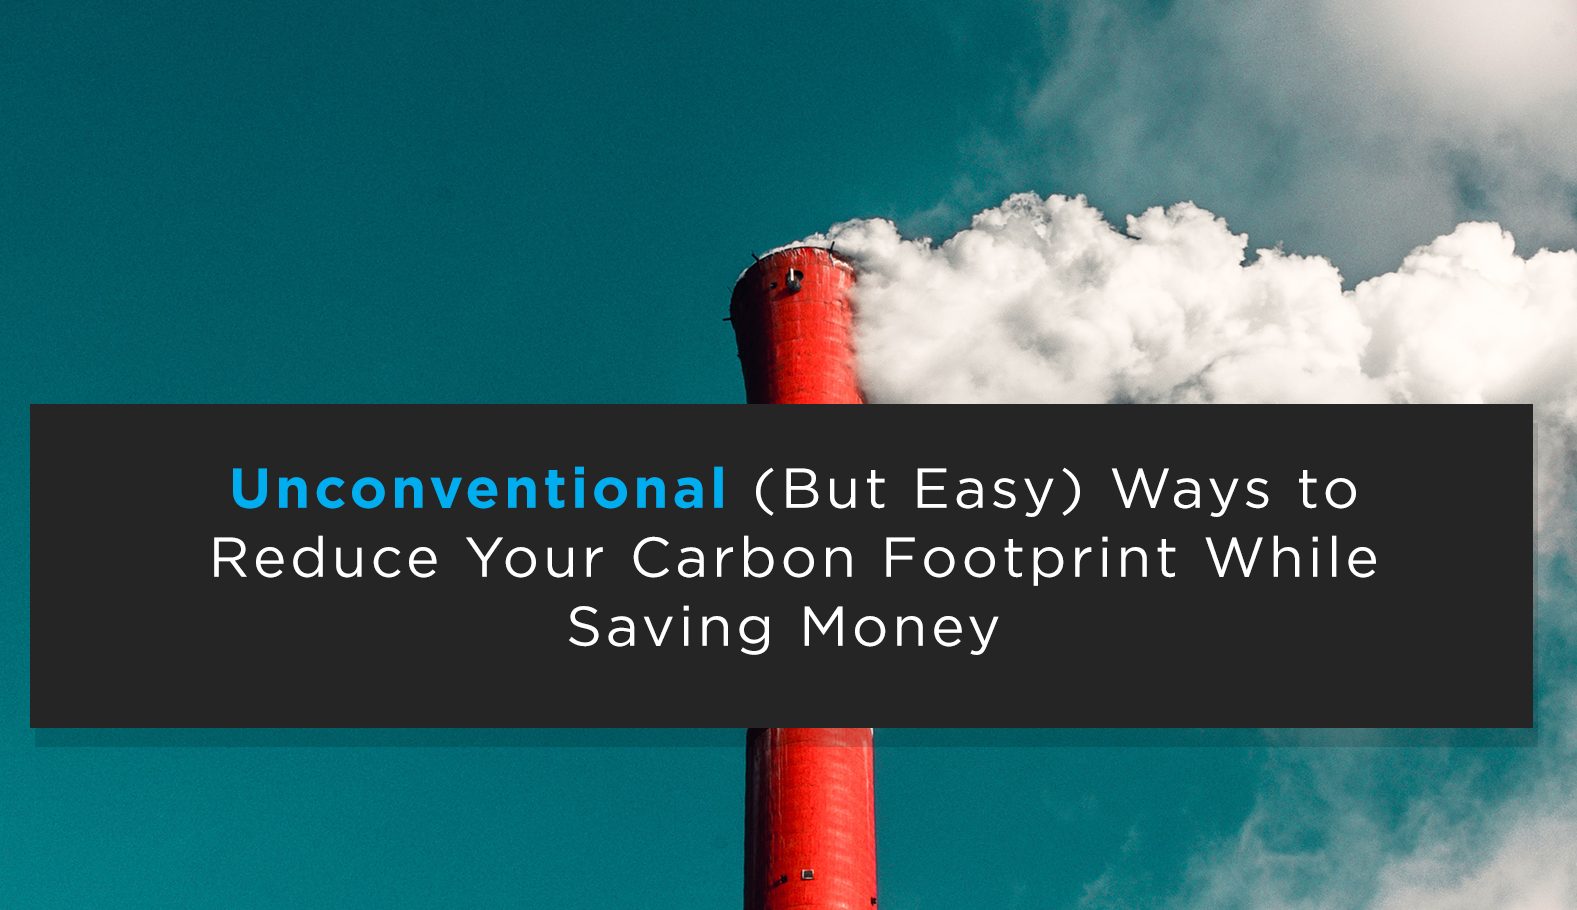 10 Unconventional (But Easy) Ways to Reduce Your Carbon Footprint While Saving Money